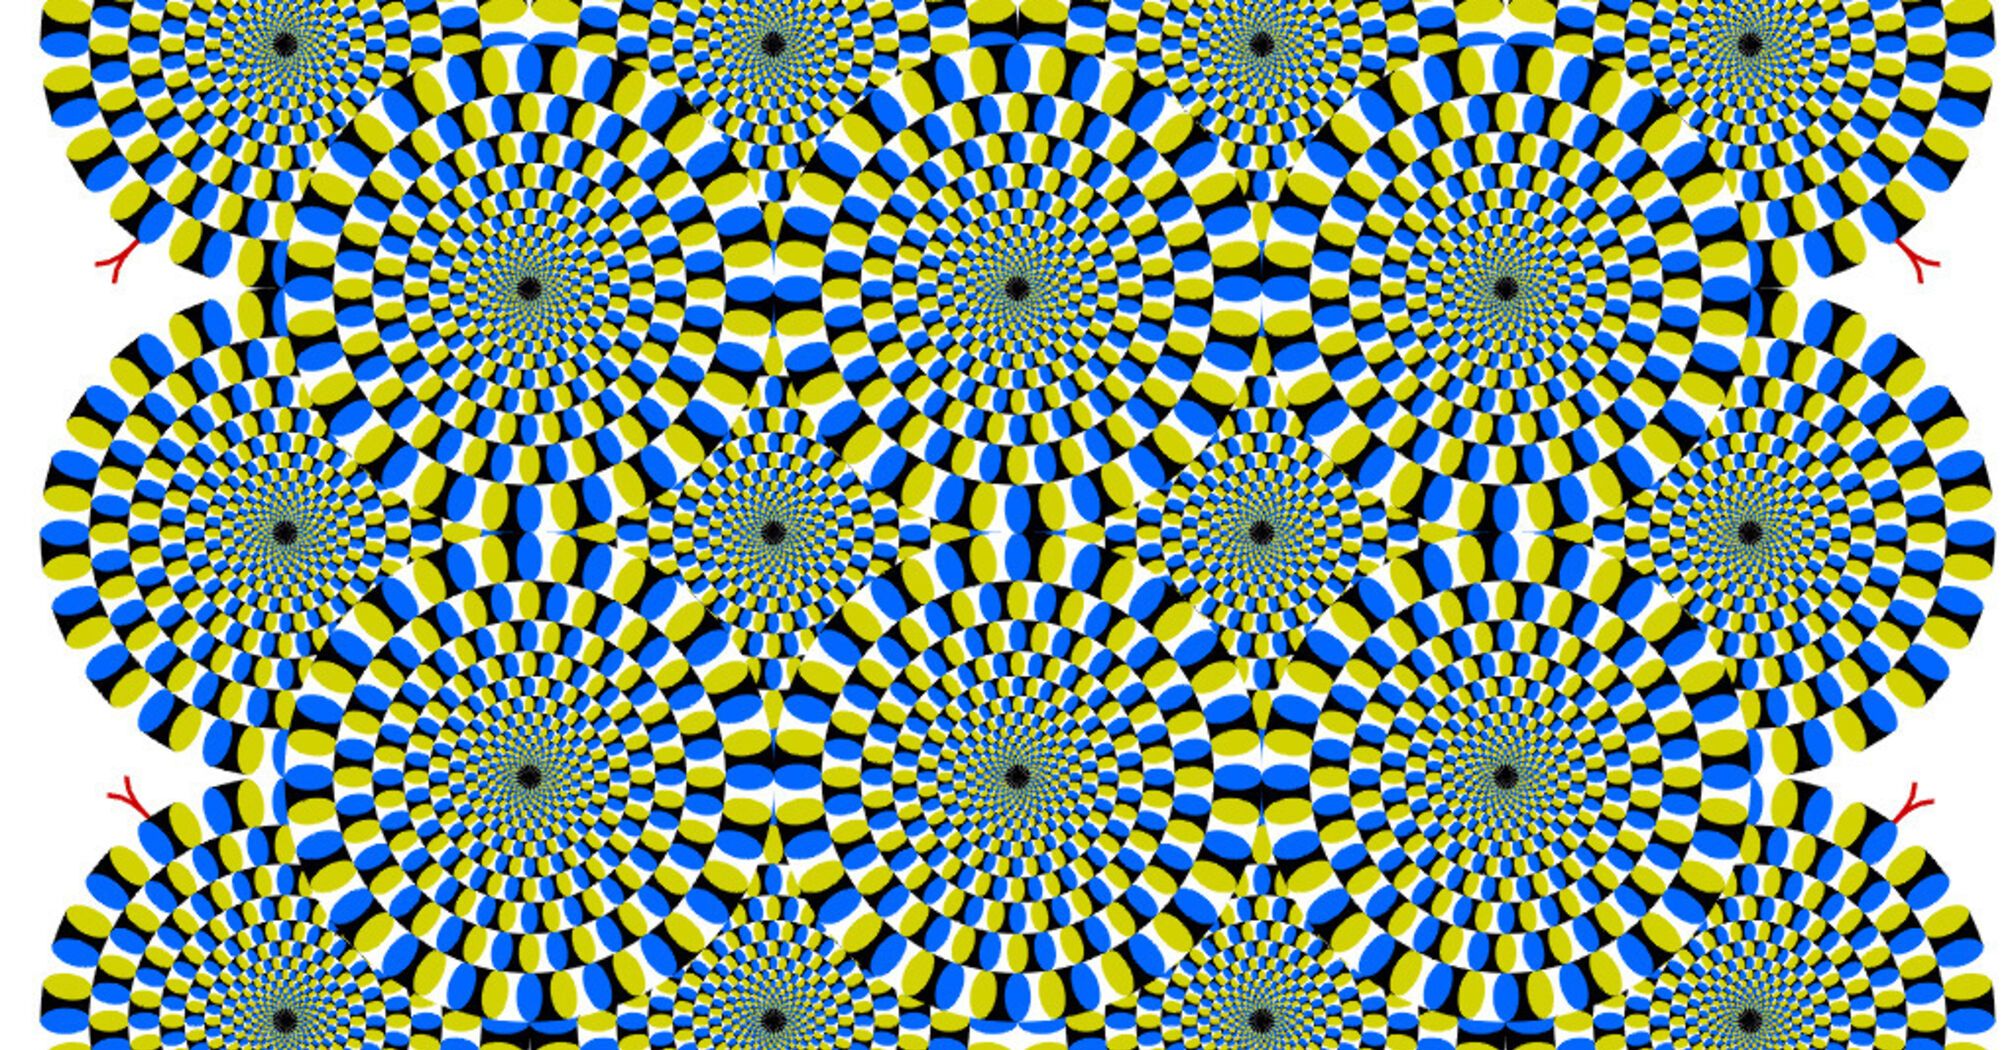 Visual Optical Illusion Test: Did you see the Rotating Snakes or Spinning Discs?